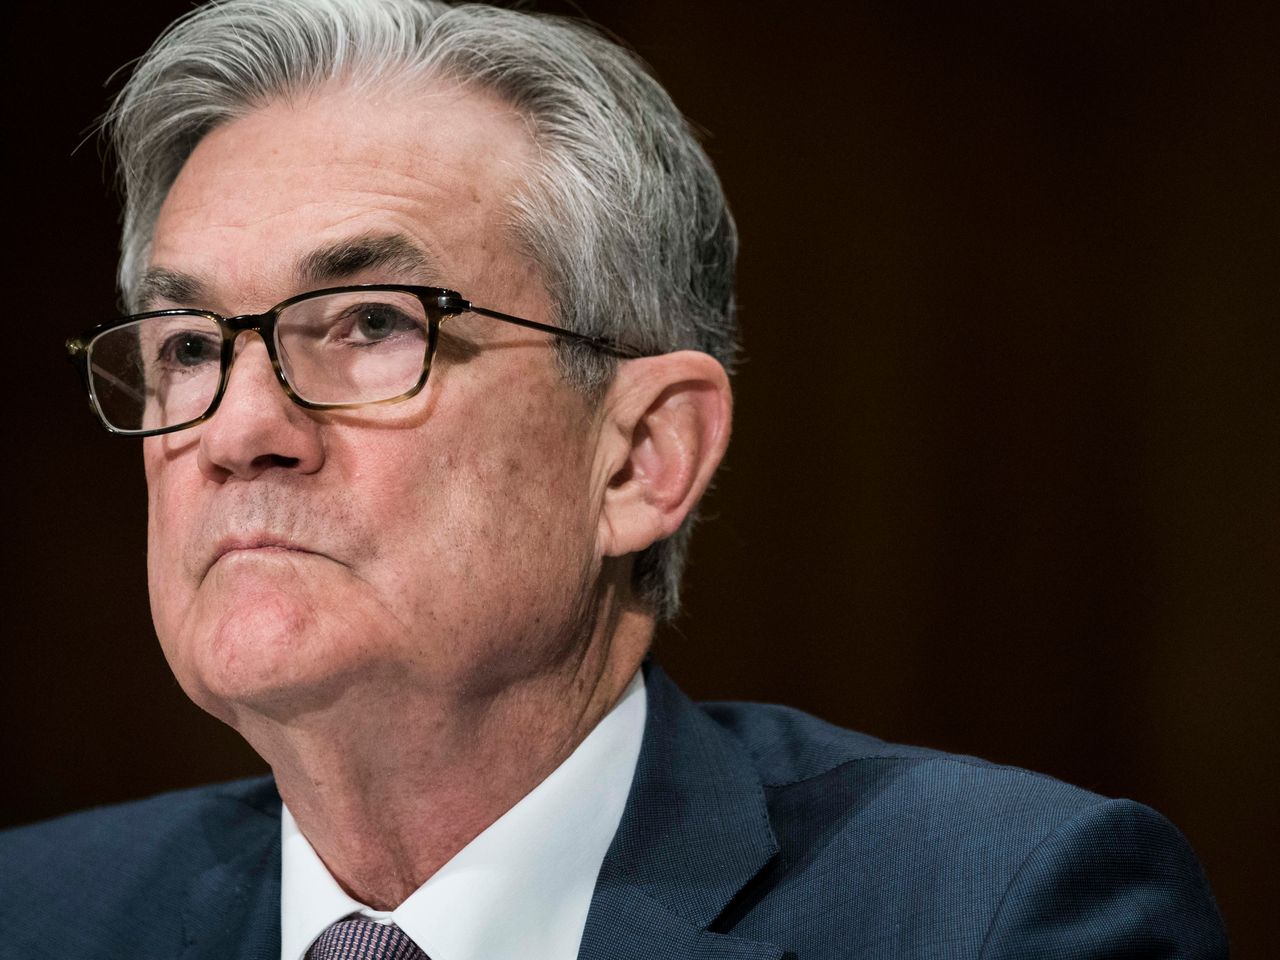 How The Fed's Interest Rate Hike Could Affect Your Finances